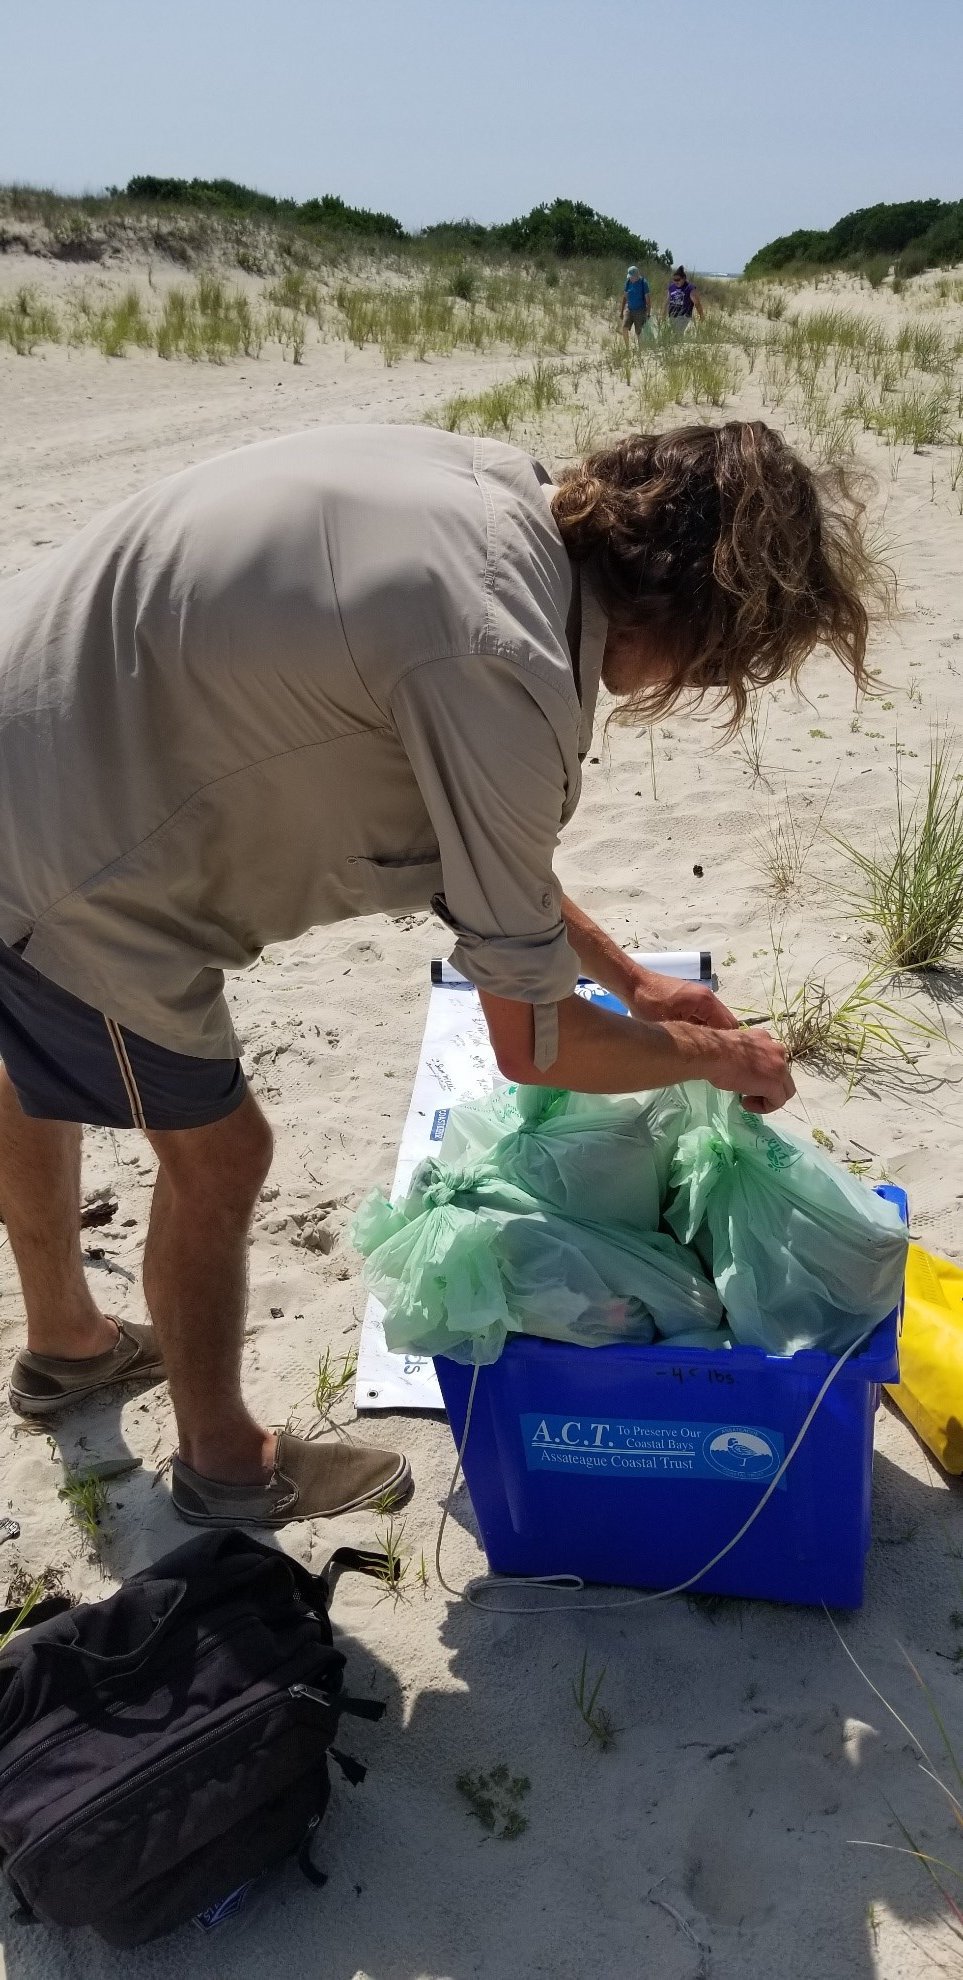 Billy-Weiland-of-Assateague-Coastal-Trust-www.actforbays.org-weighing-trash-collected-during-one-of-their-cleanup-events.jpg#asset:988